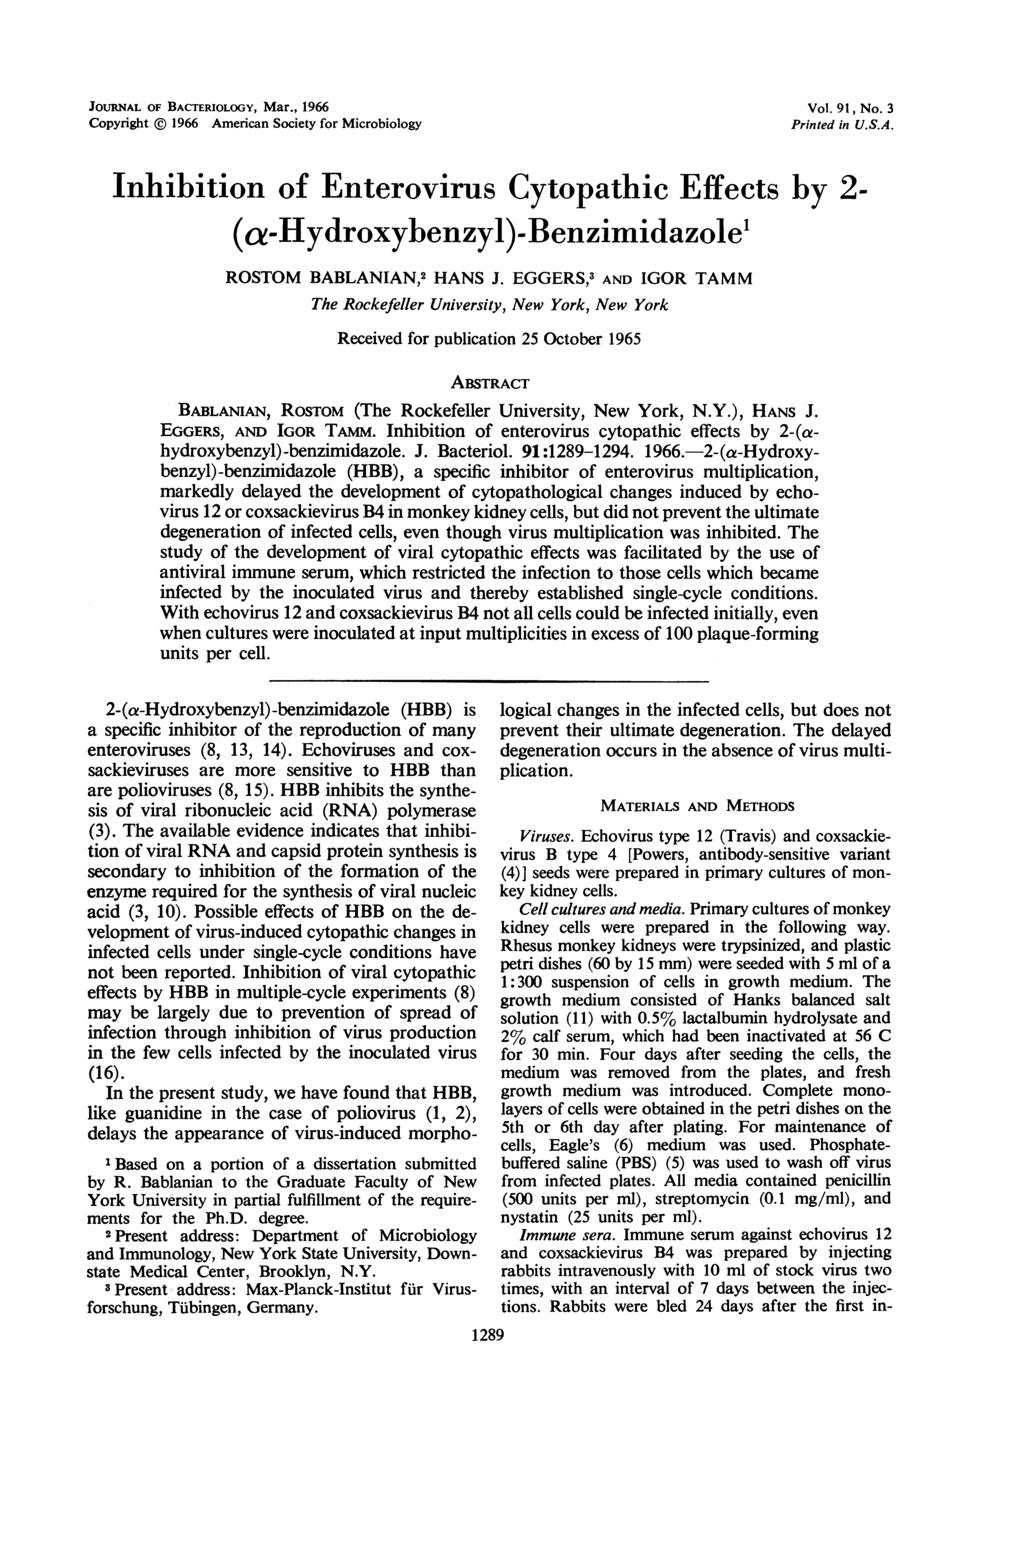 JOURNAL OF BACTROLOGY, Mar., 1966 Copyright ( 1966 American Society for Microbiology Vol. 91, No. 3 Printed in U.S.A. nhibition of nterovirus Cytopathic ffects by 2- (a-hydroybenzyl)-benzimidazolel ROSTOM BABLANAN,2 HANS J.